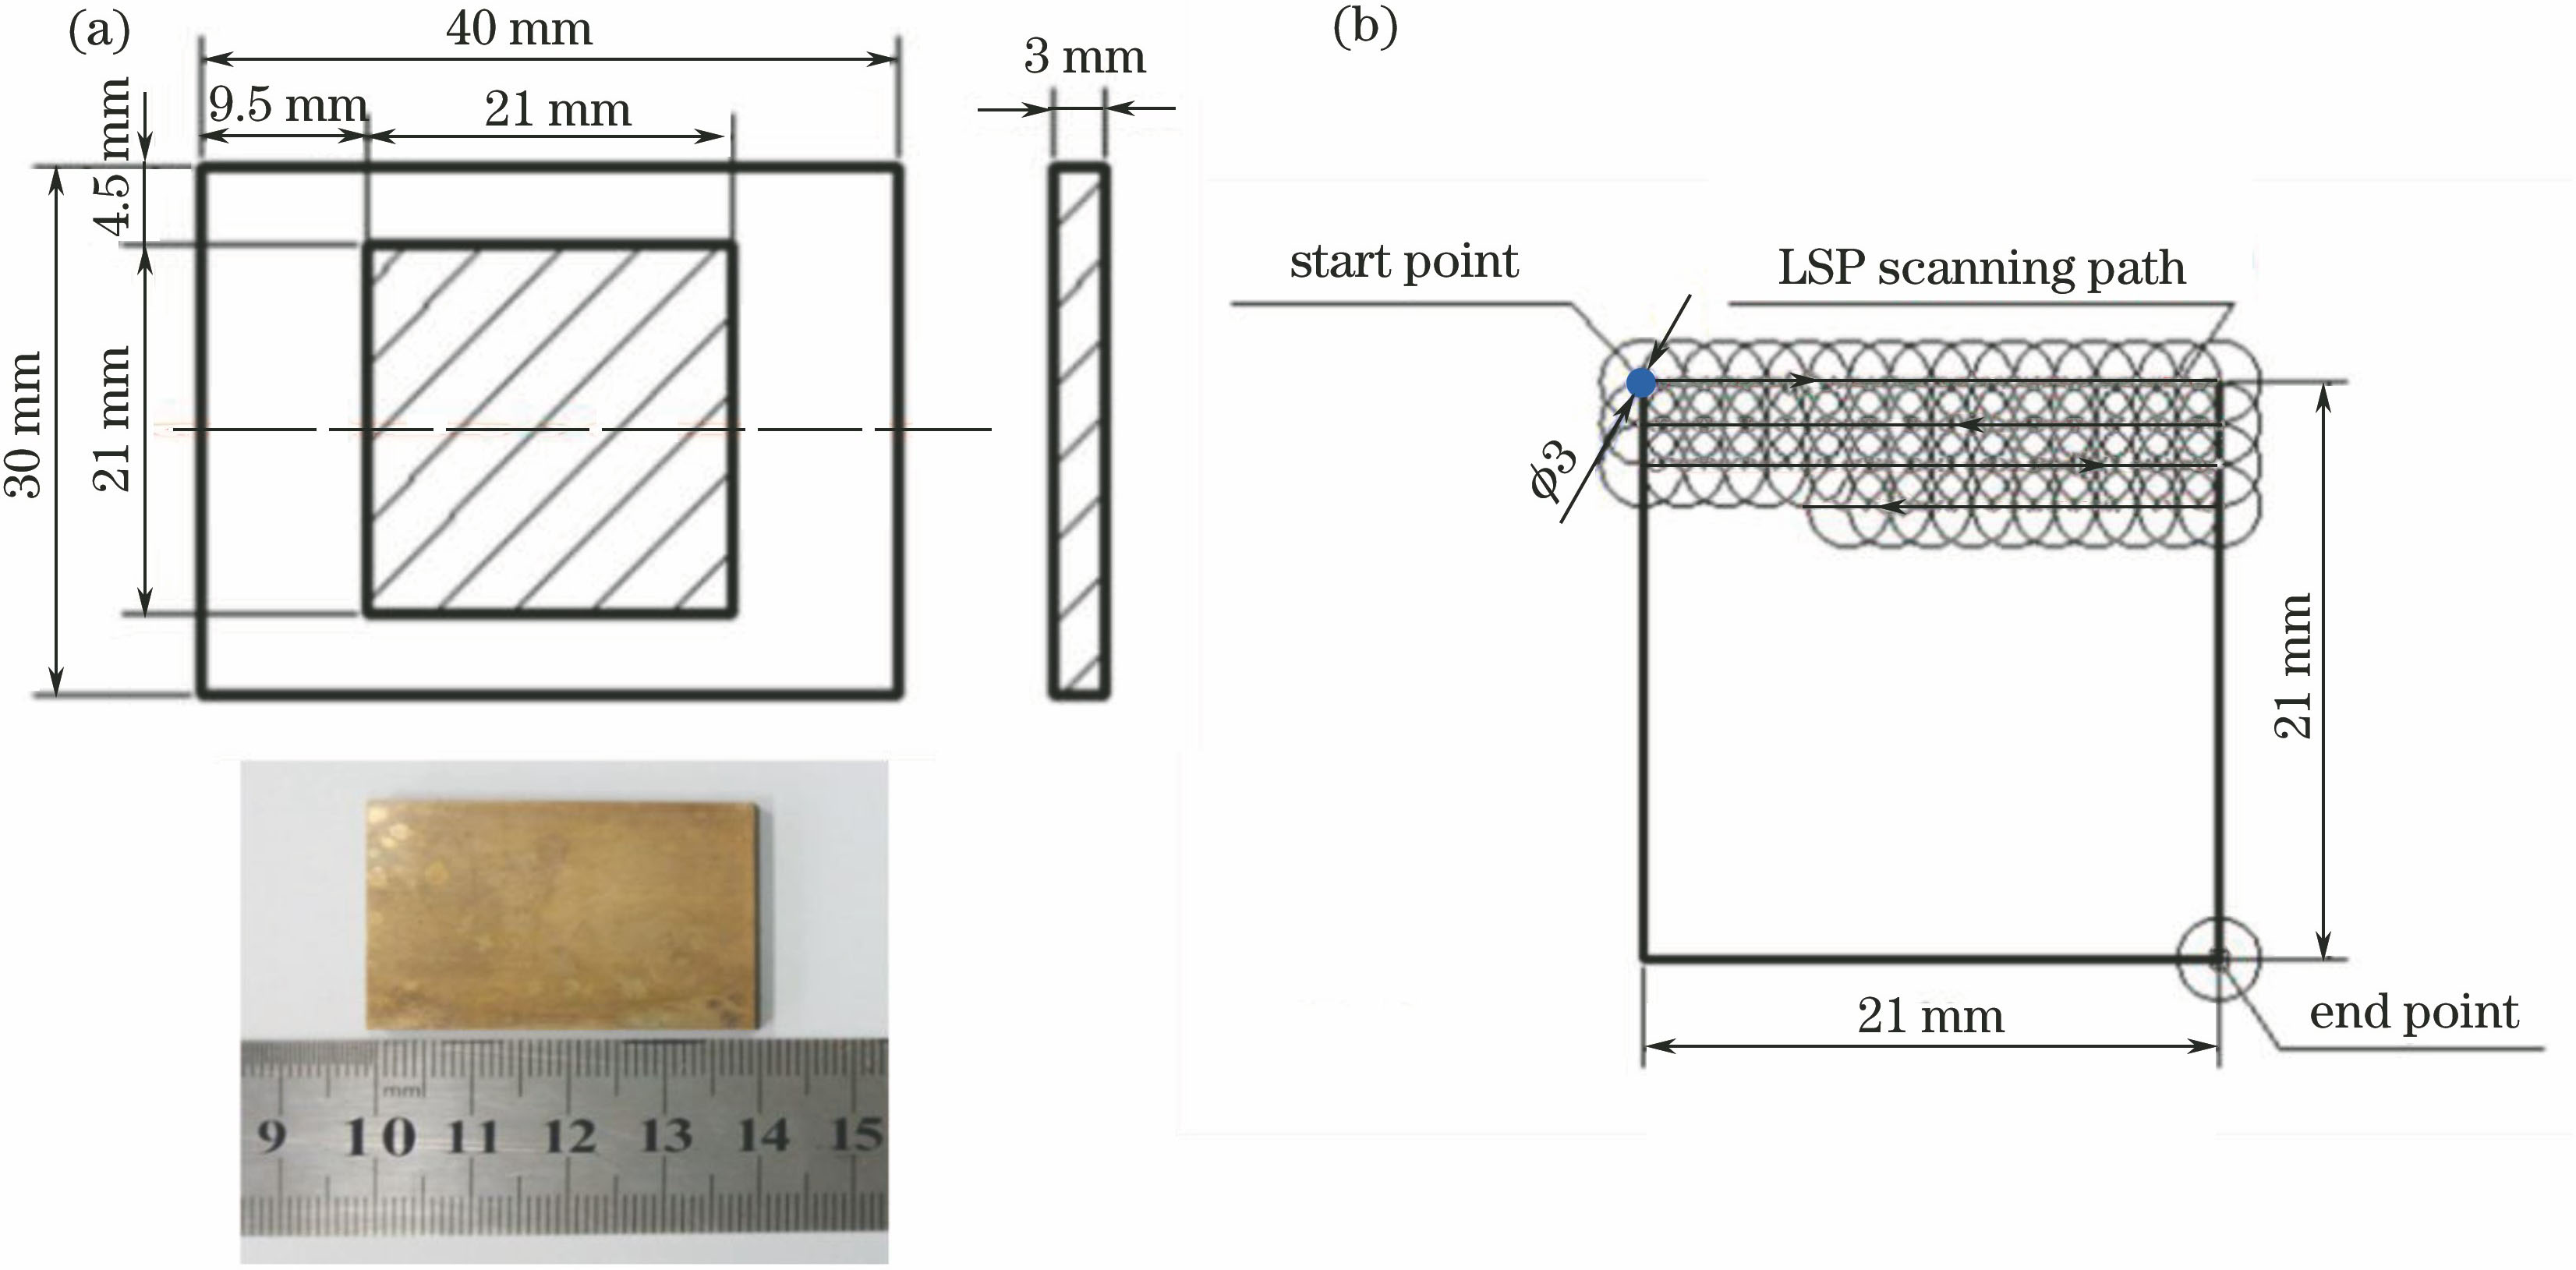 LSP sample. (a) Dimension; (b) laser scanning path for impact area